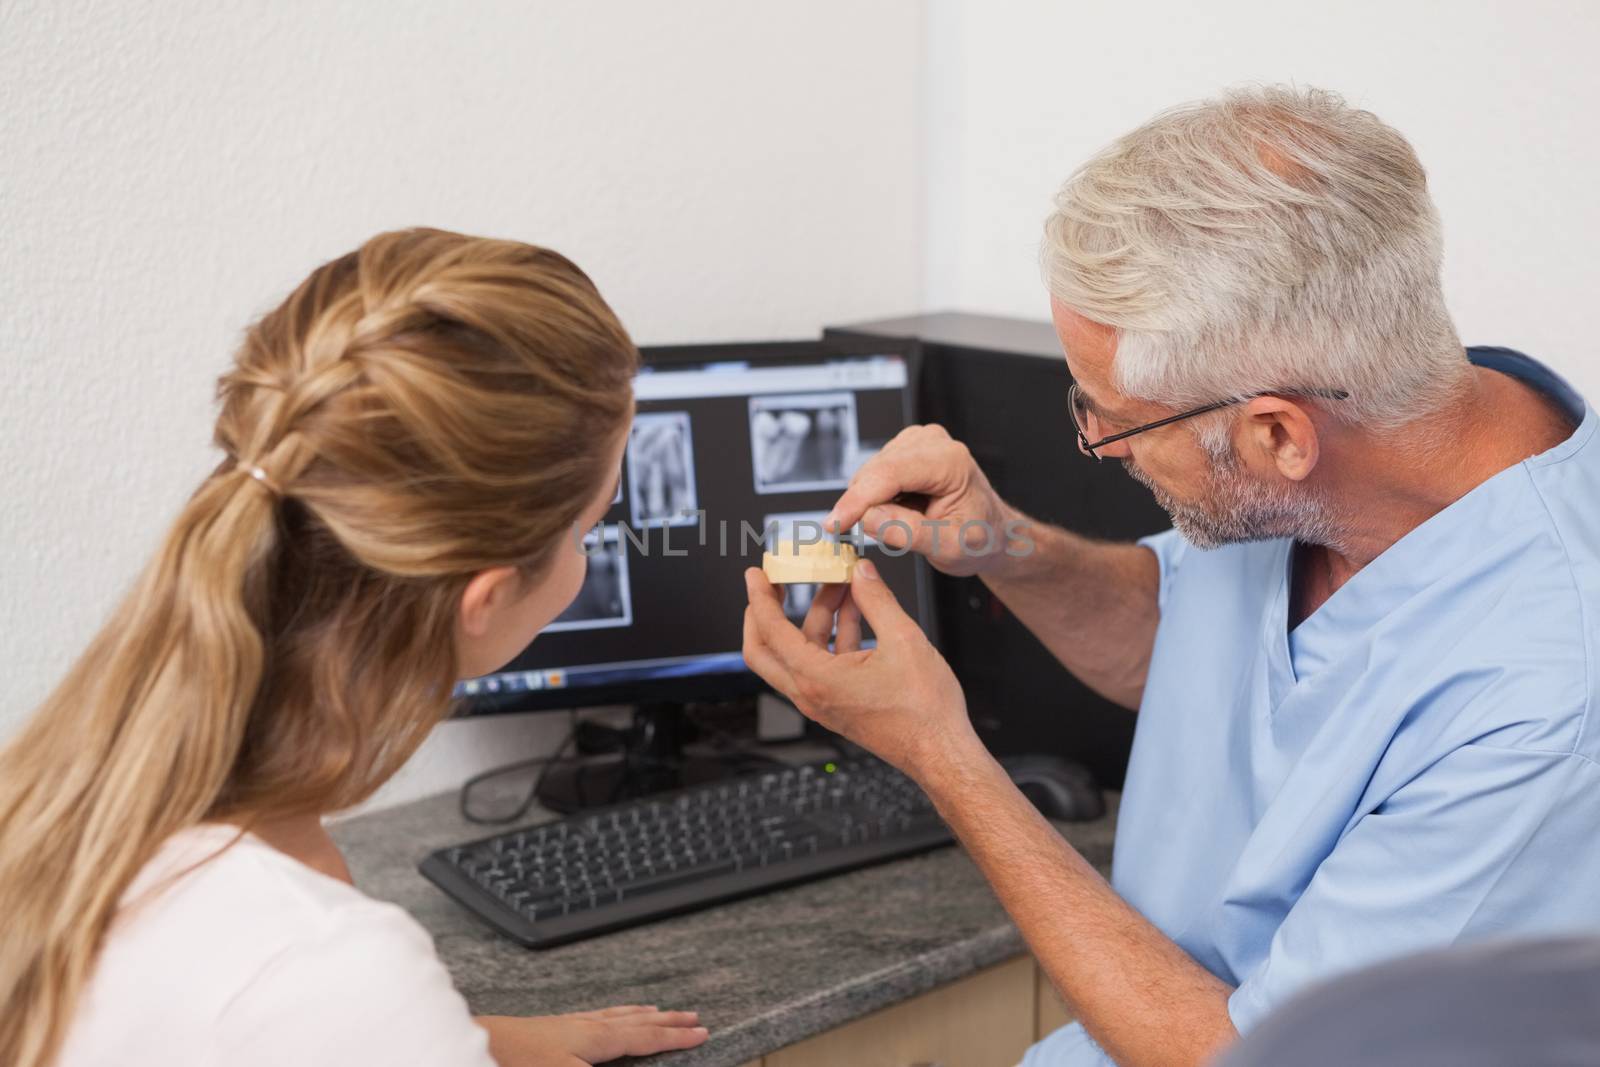 Dentist showing patient model of teeth and xrays by Wavebreakmedia